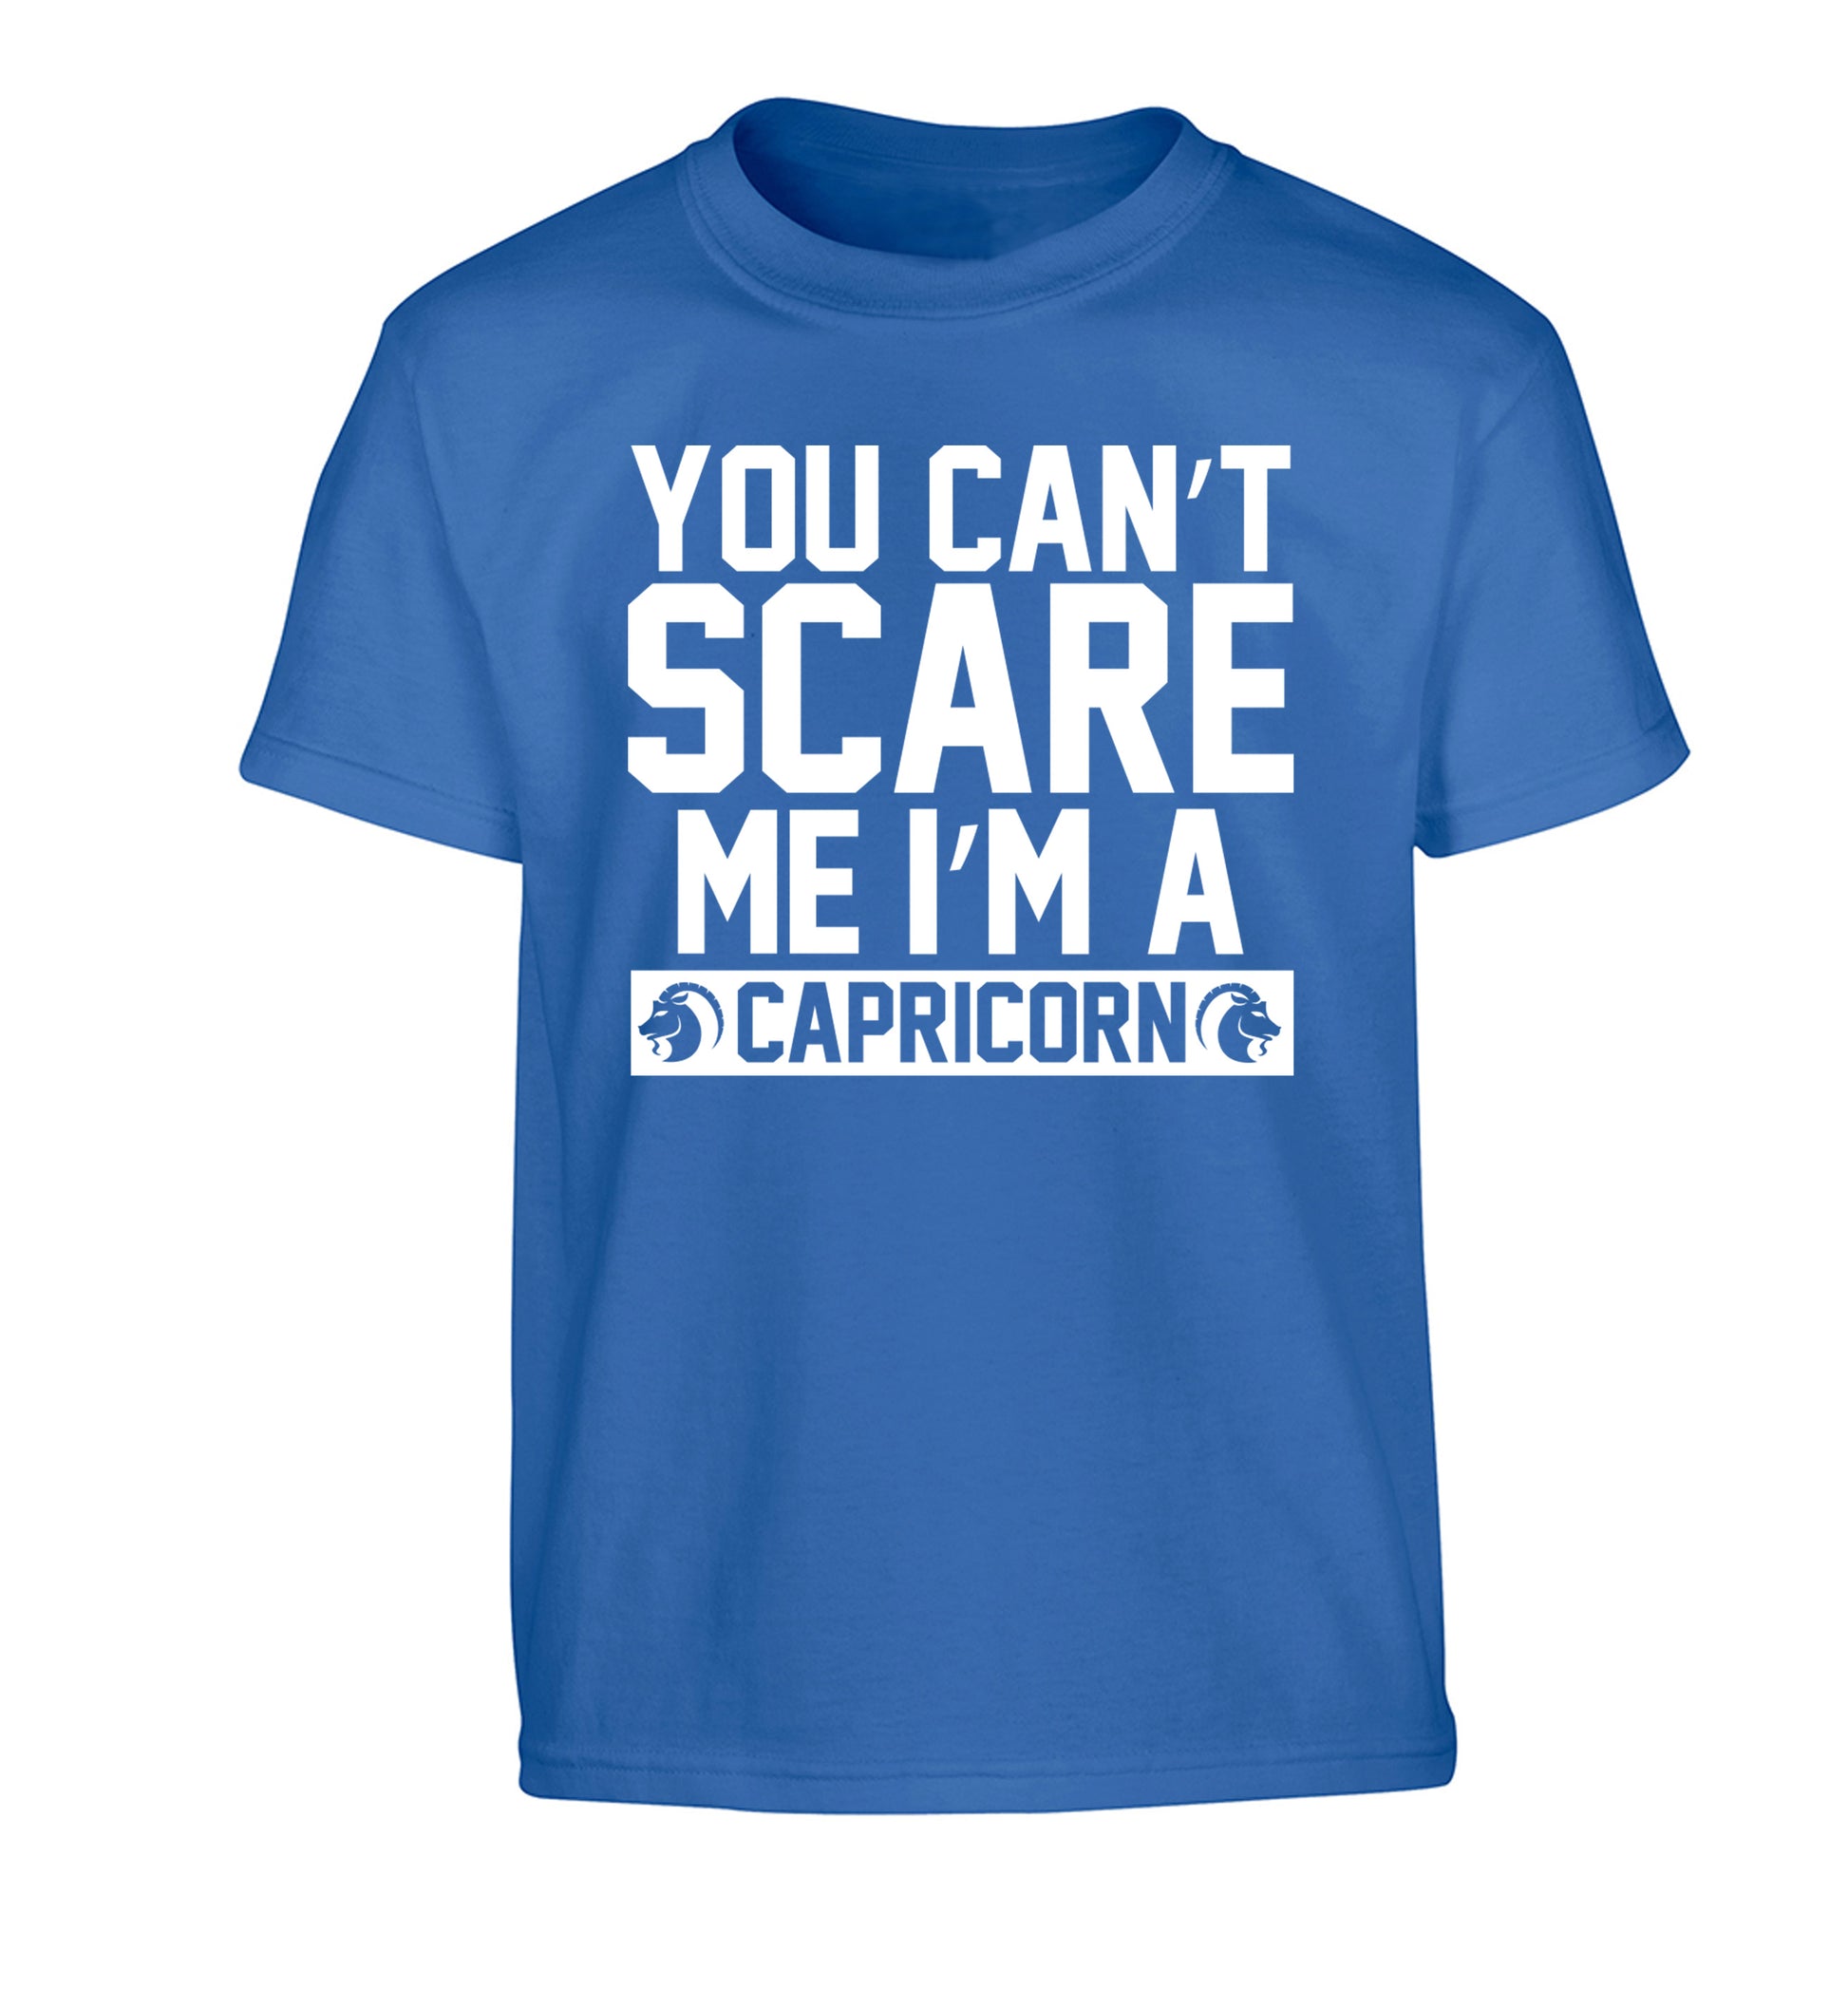 You can't scare me I'm a capricorn Children's blue Tshirt 12-13 Years